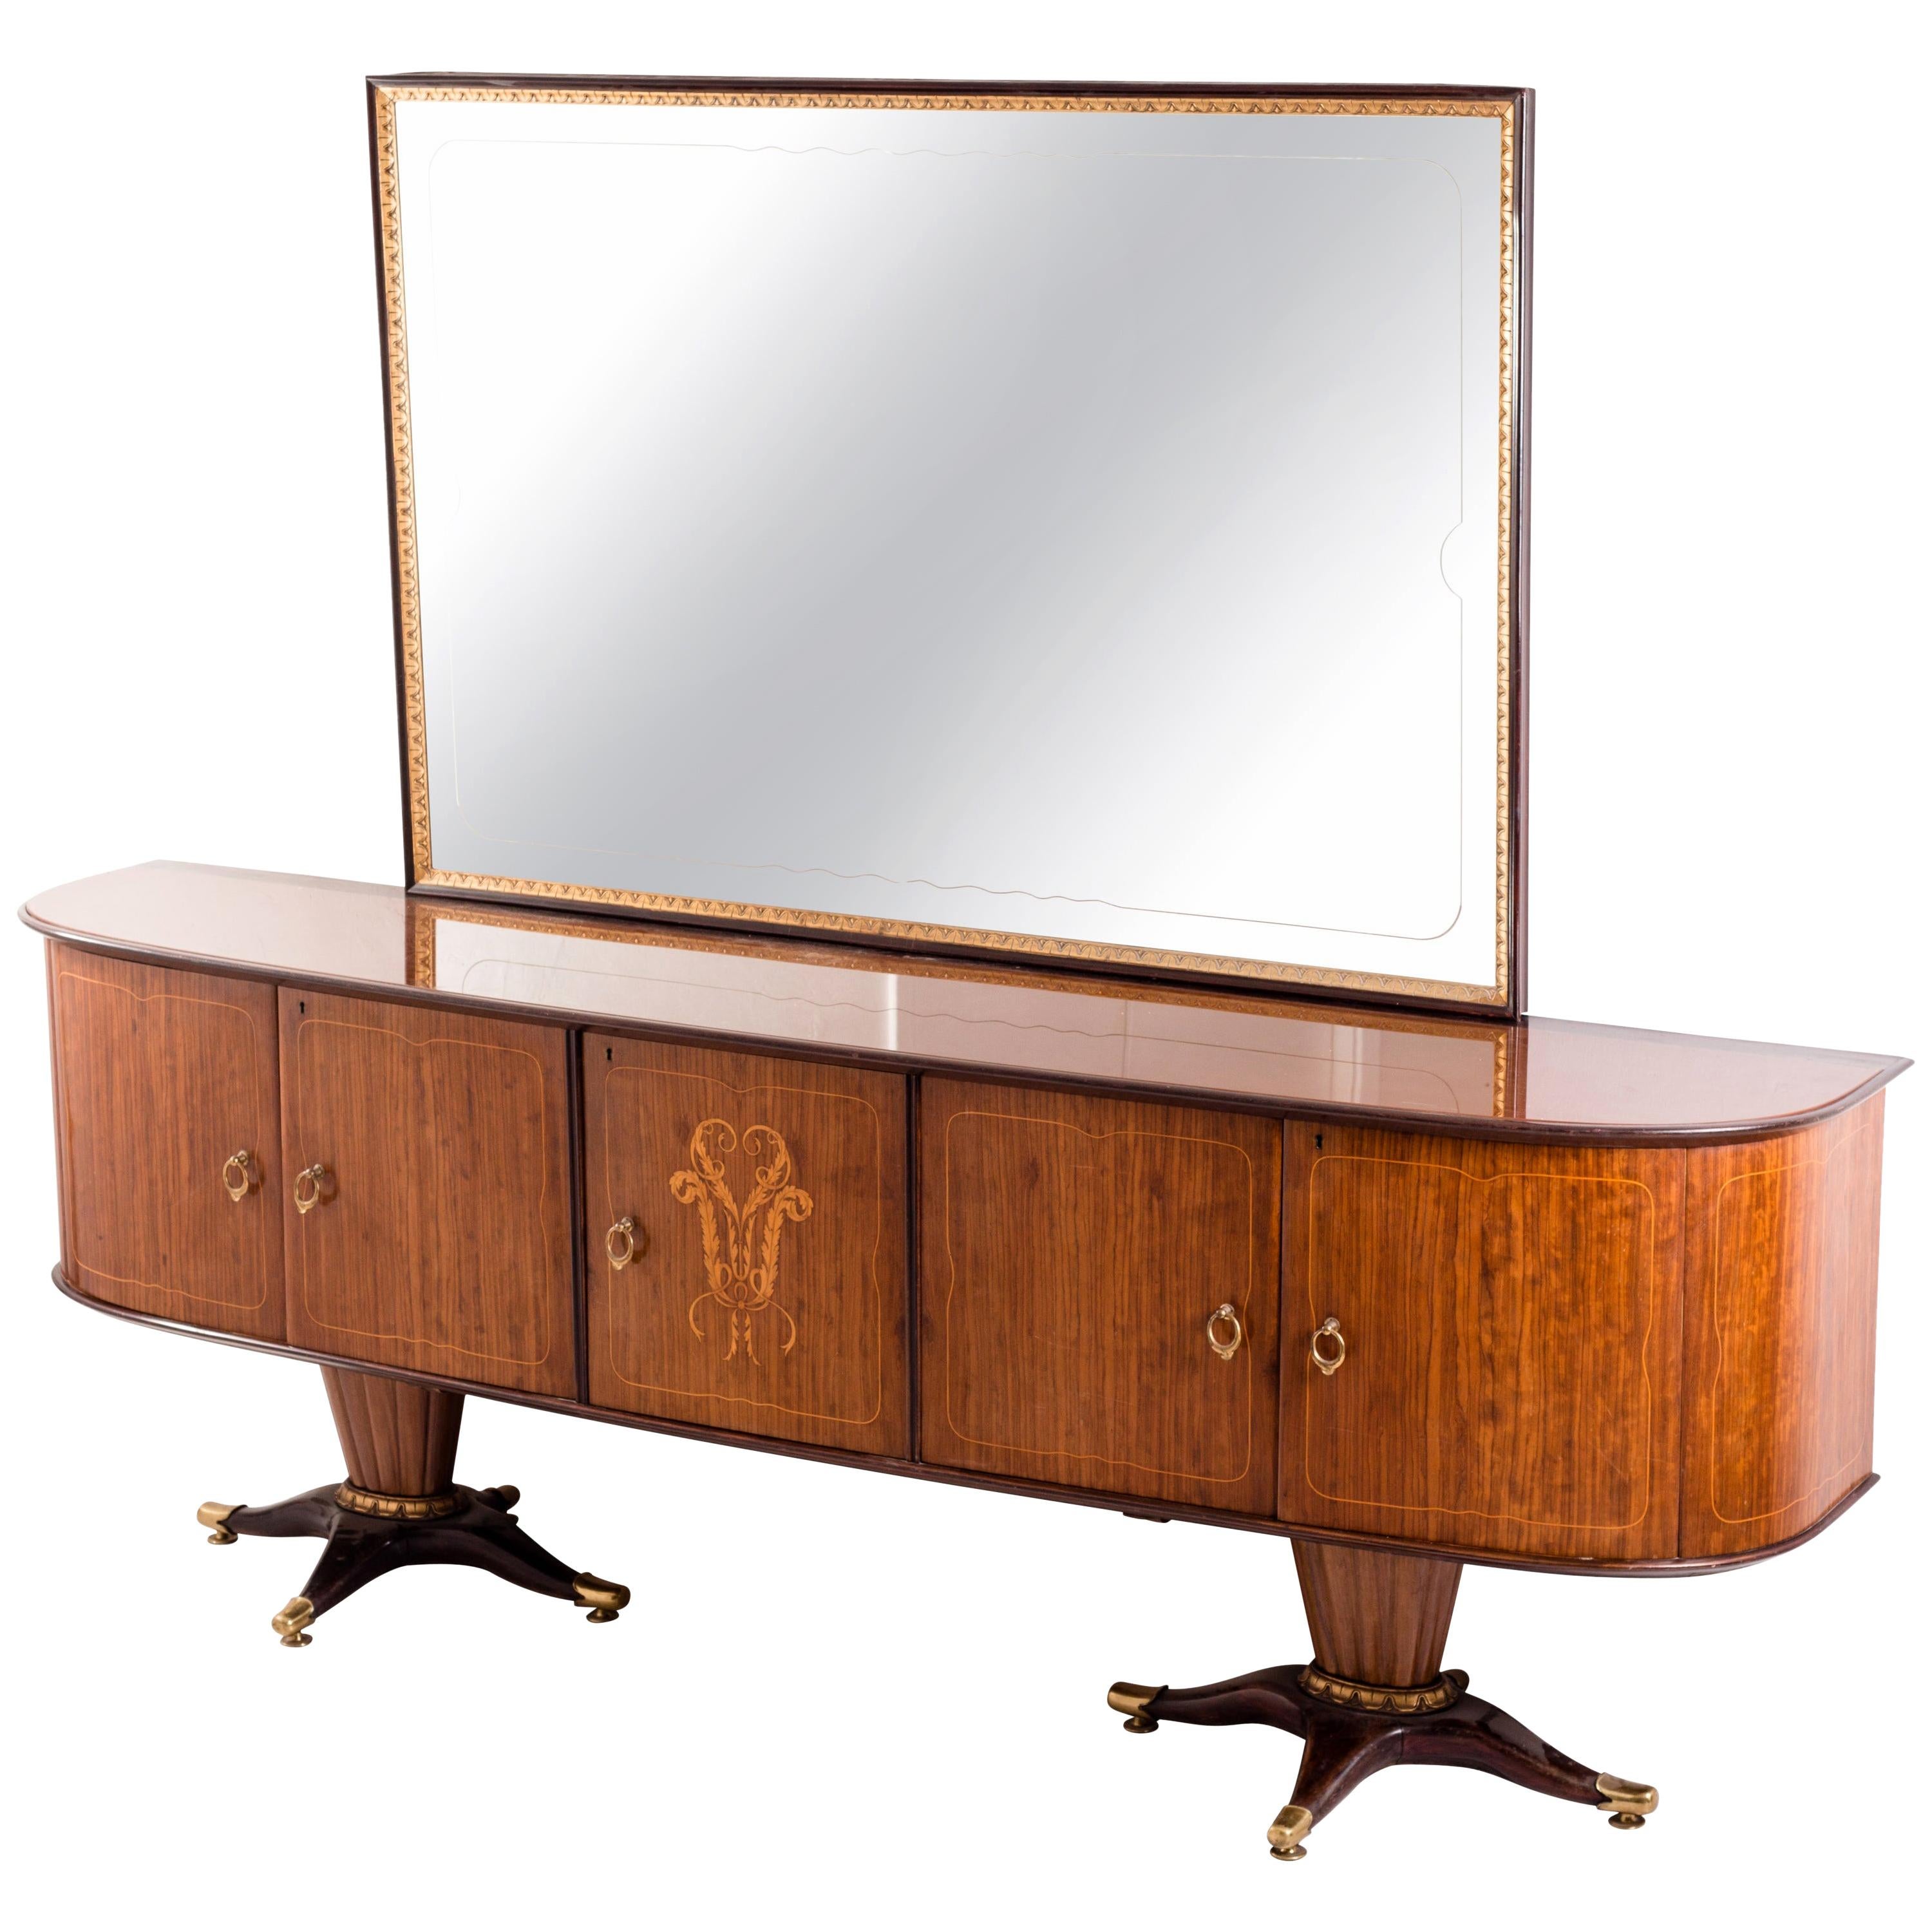 Italian Midcentury Sideboard with Mirror Attributed to Paolo Buffa, 1950s